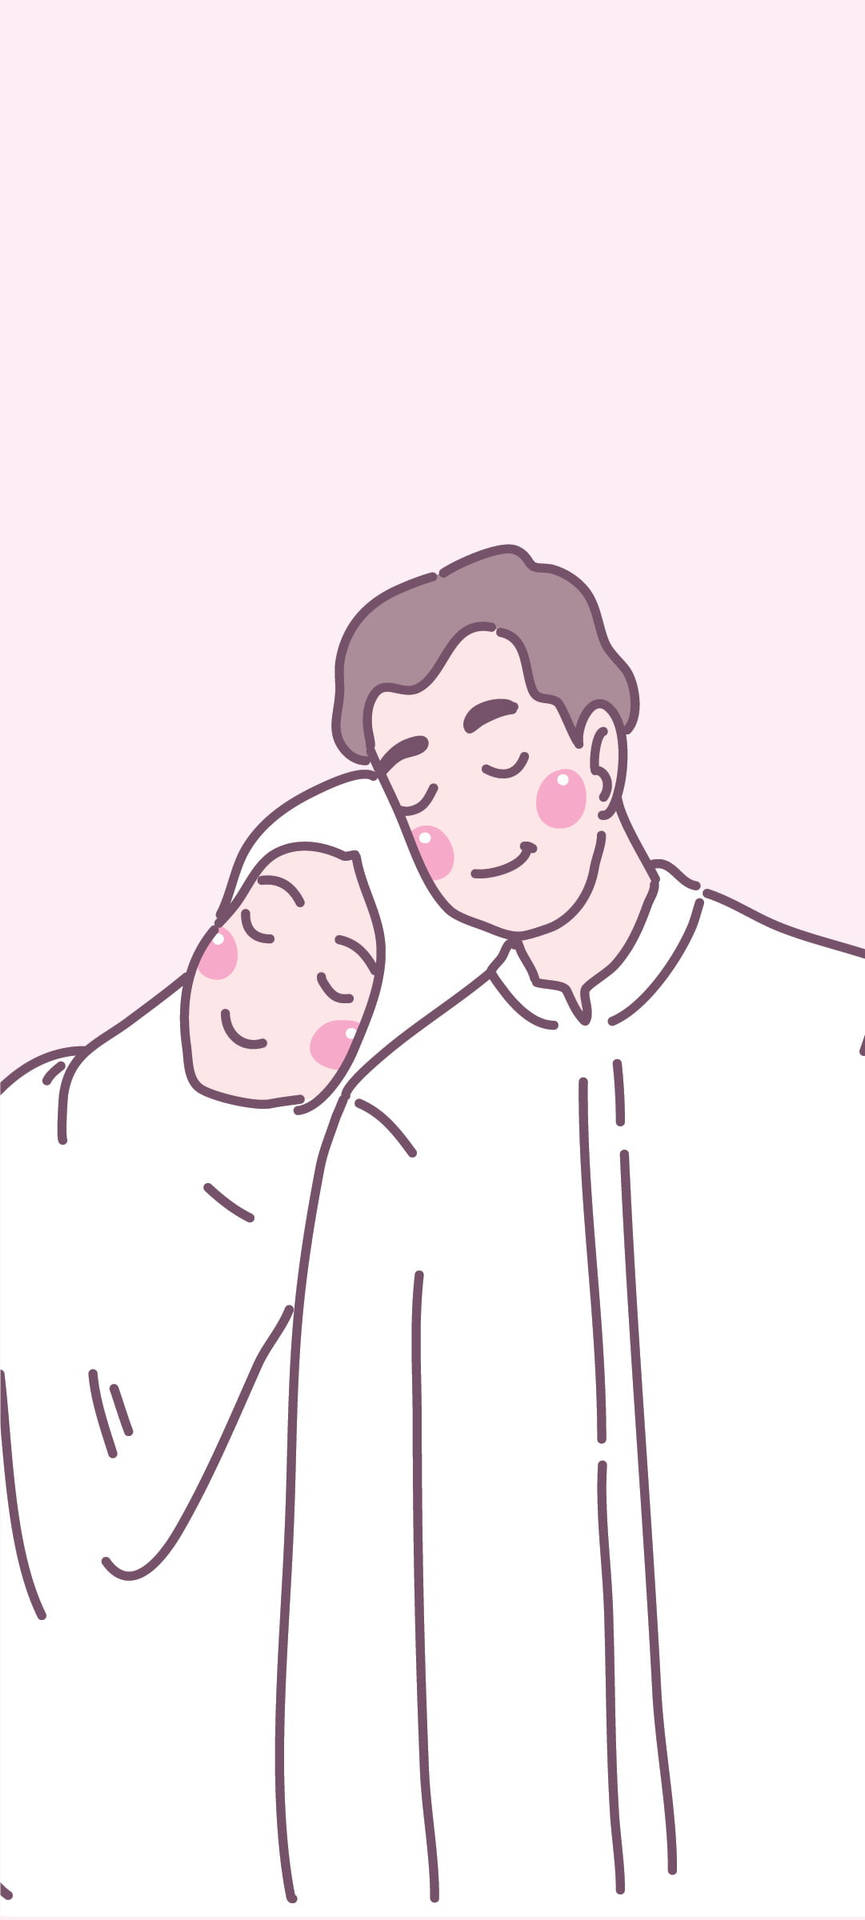 Download Muslim Couple Cartoon Pink And White Aesthetic Wallpaper ...